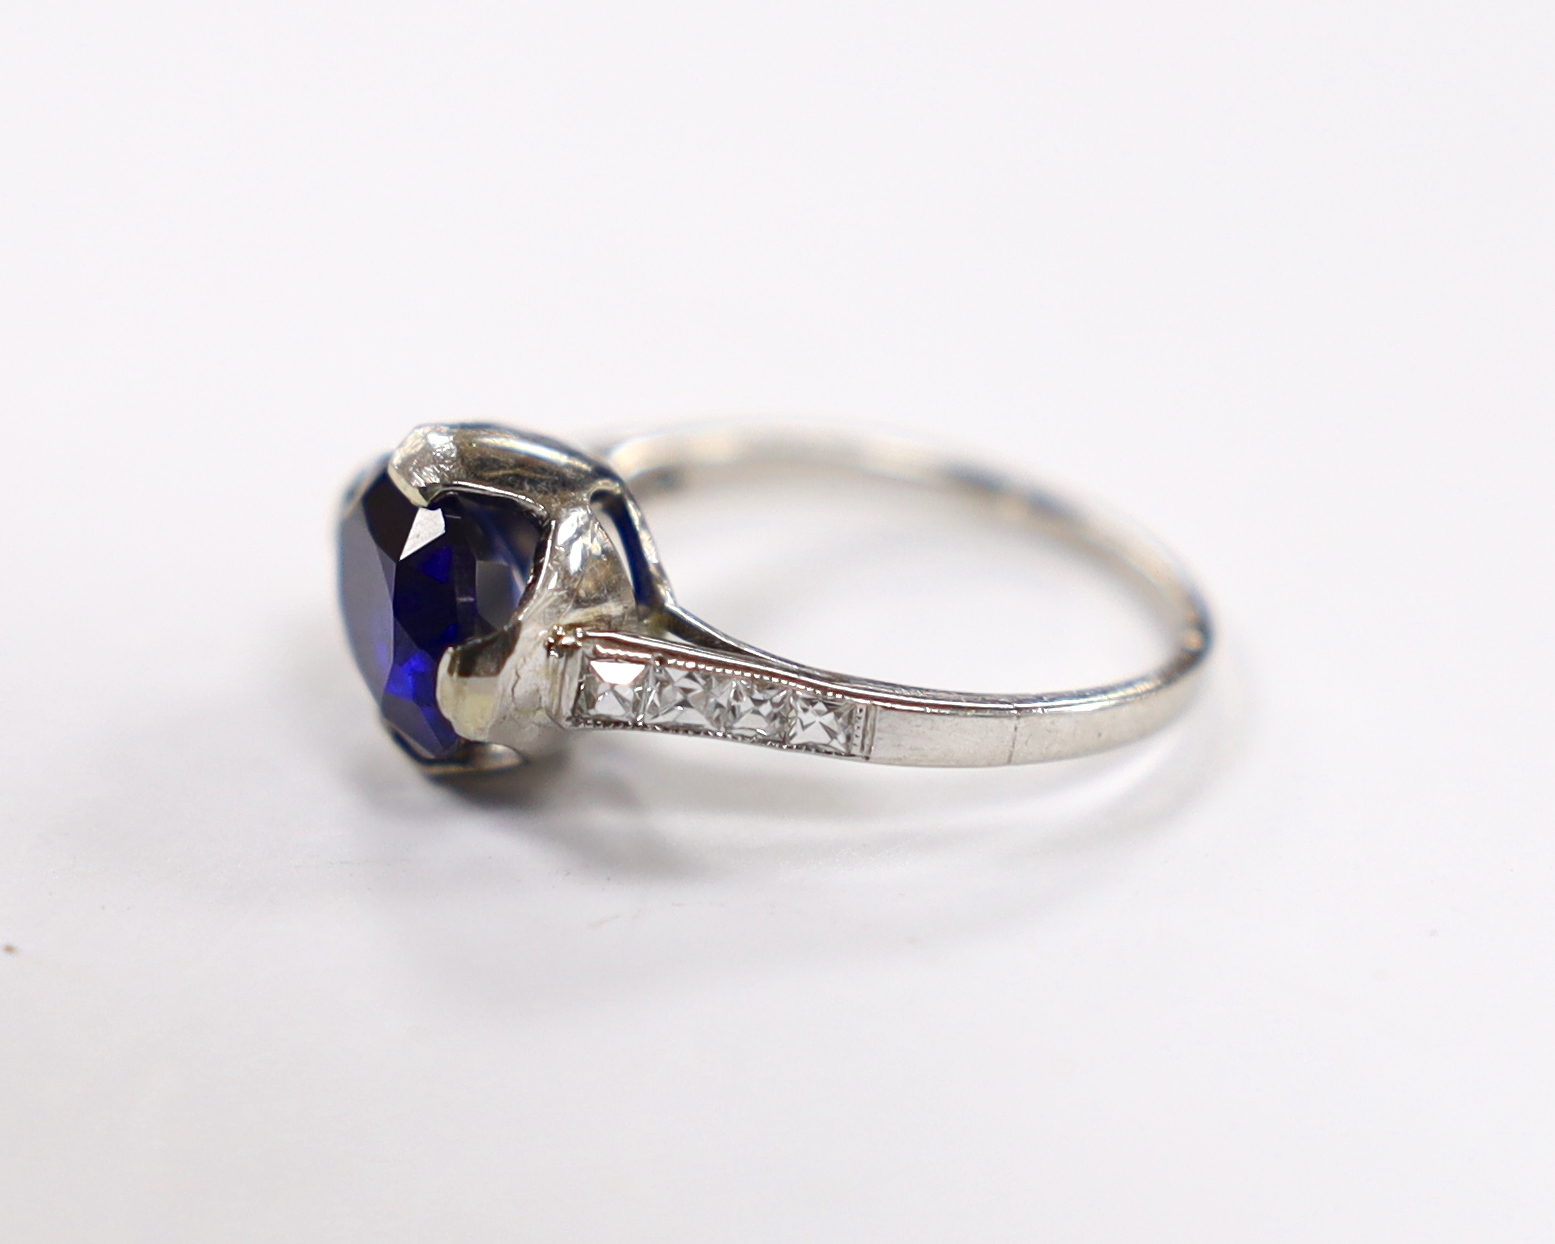 A plat. and iridium, single stone oval cut synthetic sapphire set ring, with graduated diamond chip set shoulders, the shank bearing the signature 'Tiffany & Co', size G, gross weight 3.7 grams.